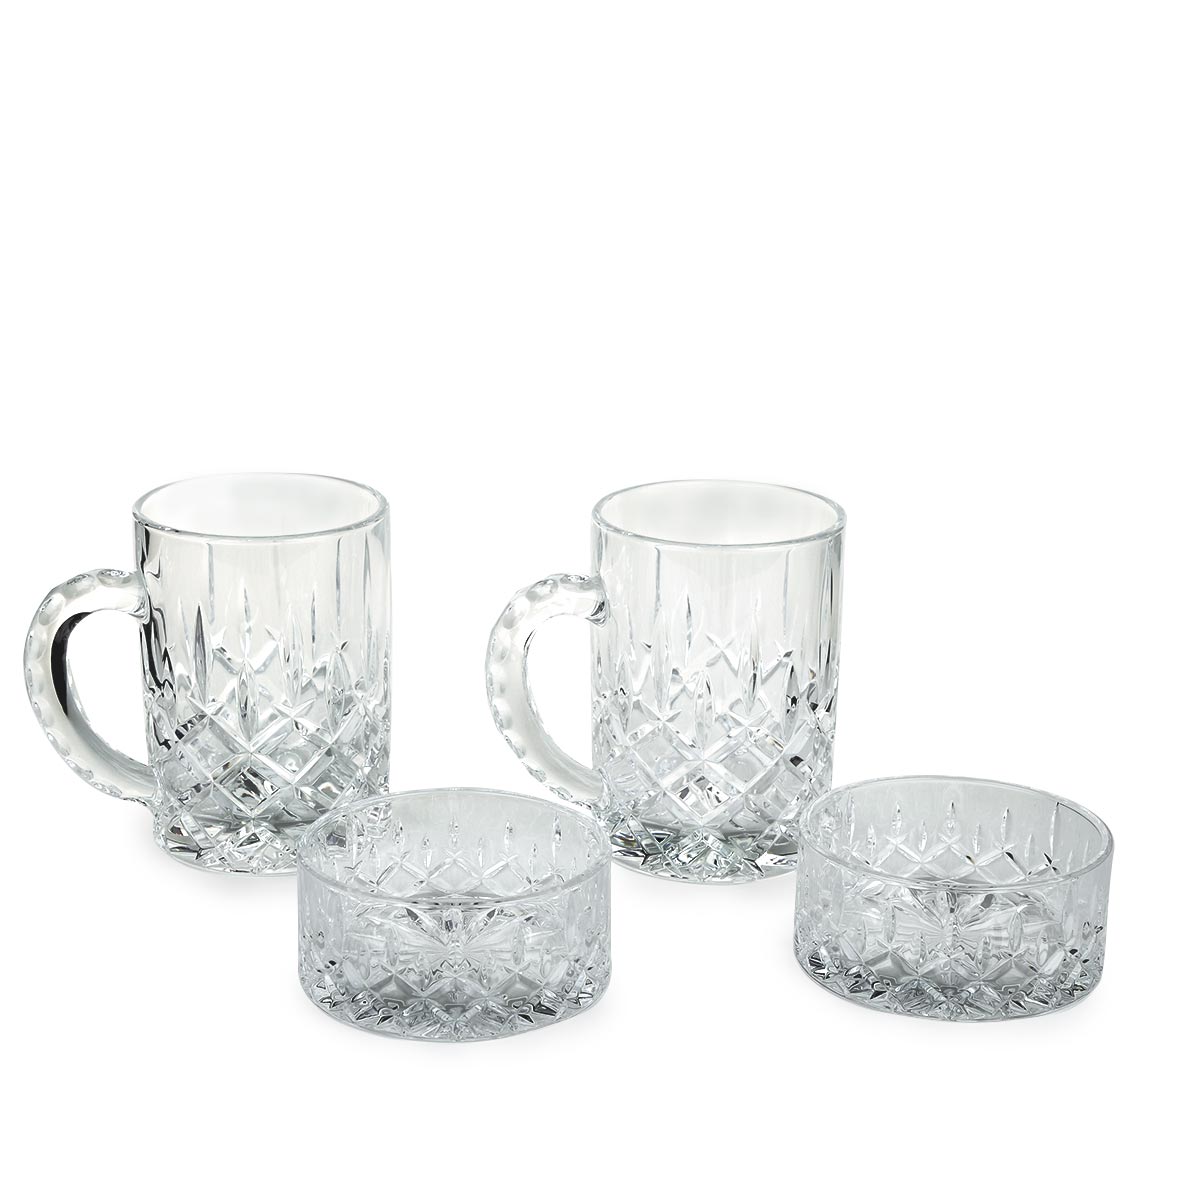 Nachtmann Noblesse Beer Mugs with 2 Nut Bowls Set